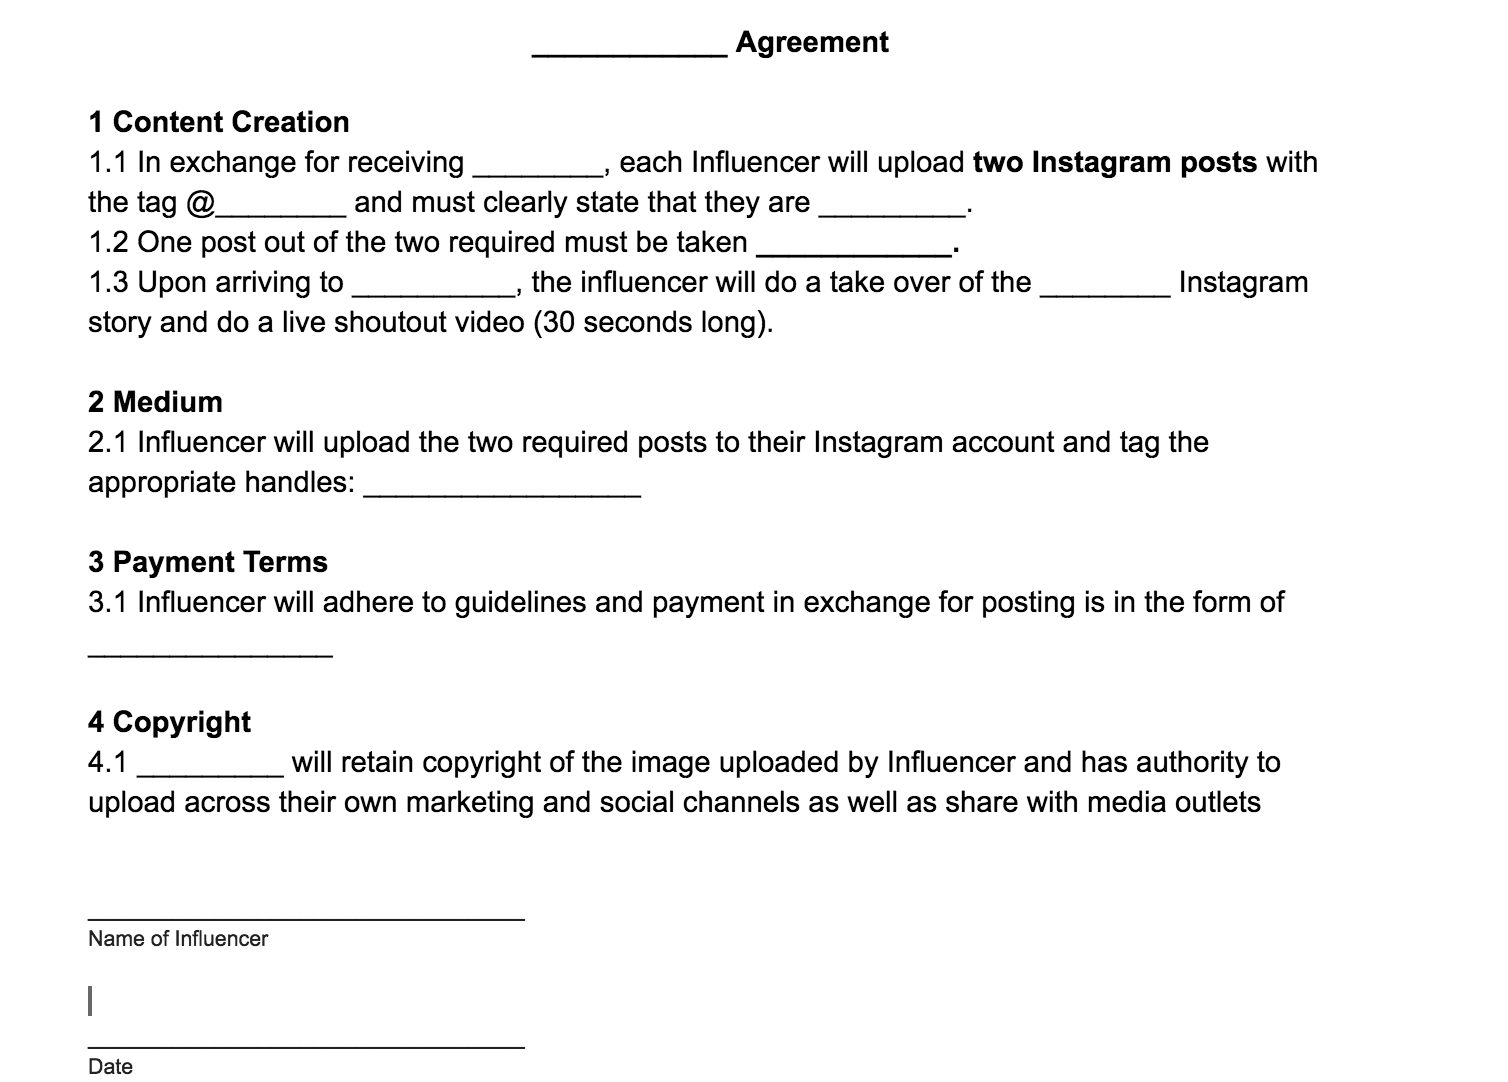 Onlyfans Manager Contract Template